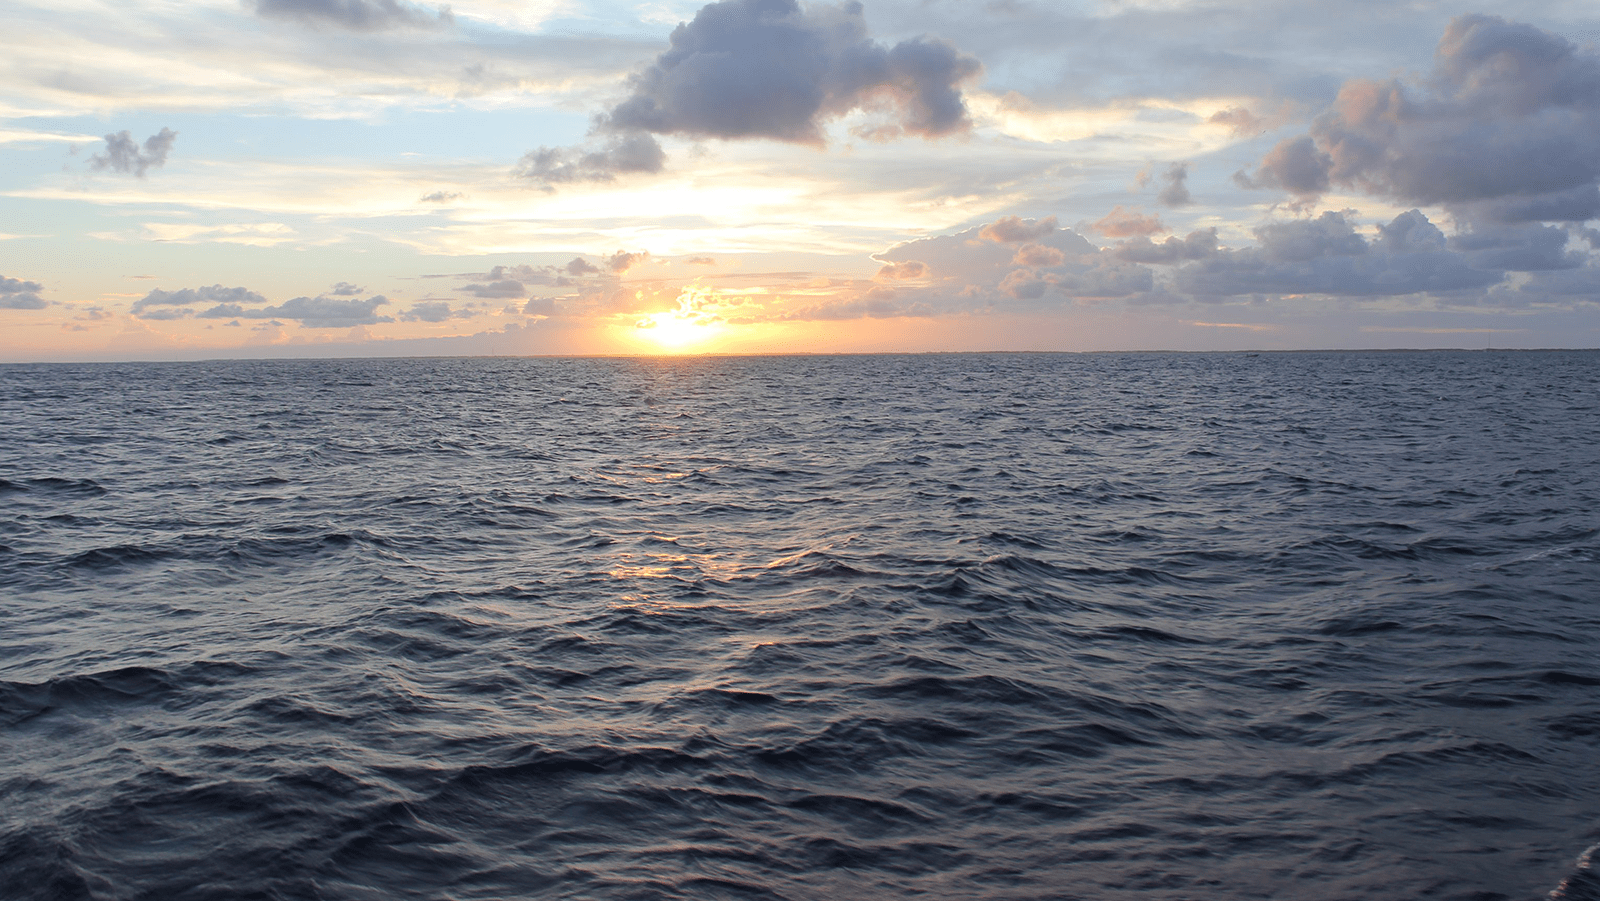 A sunset above on the horizon of a dark blue ocean